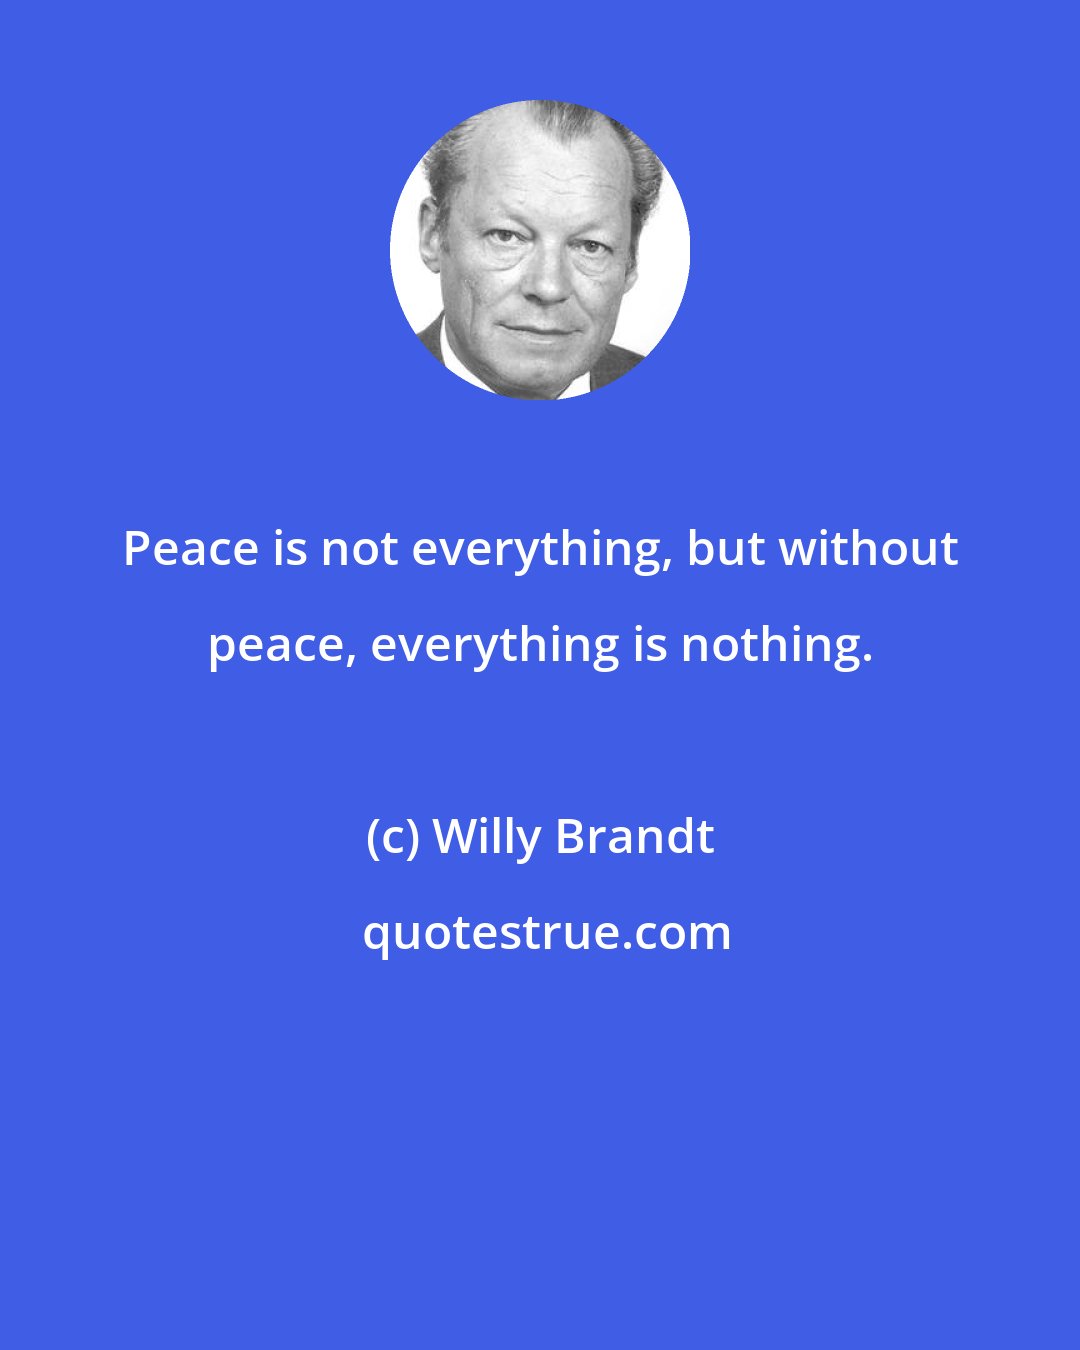 Willy Brandt: Peace is not everything, but without peace, everything is nothing.